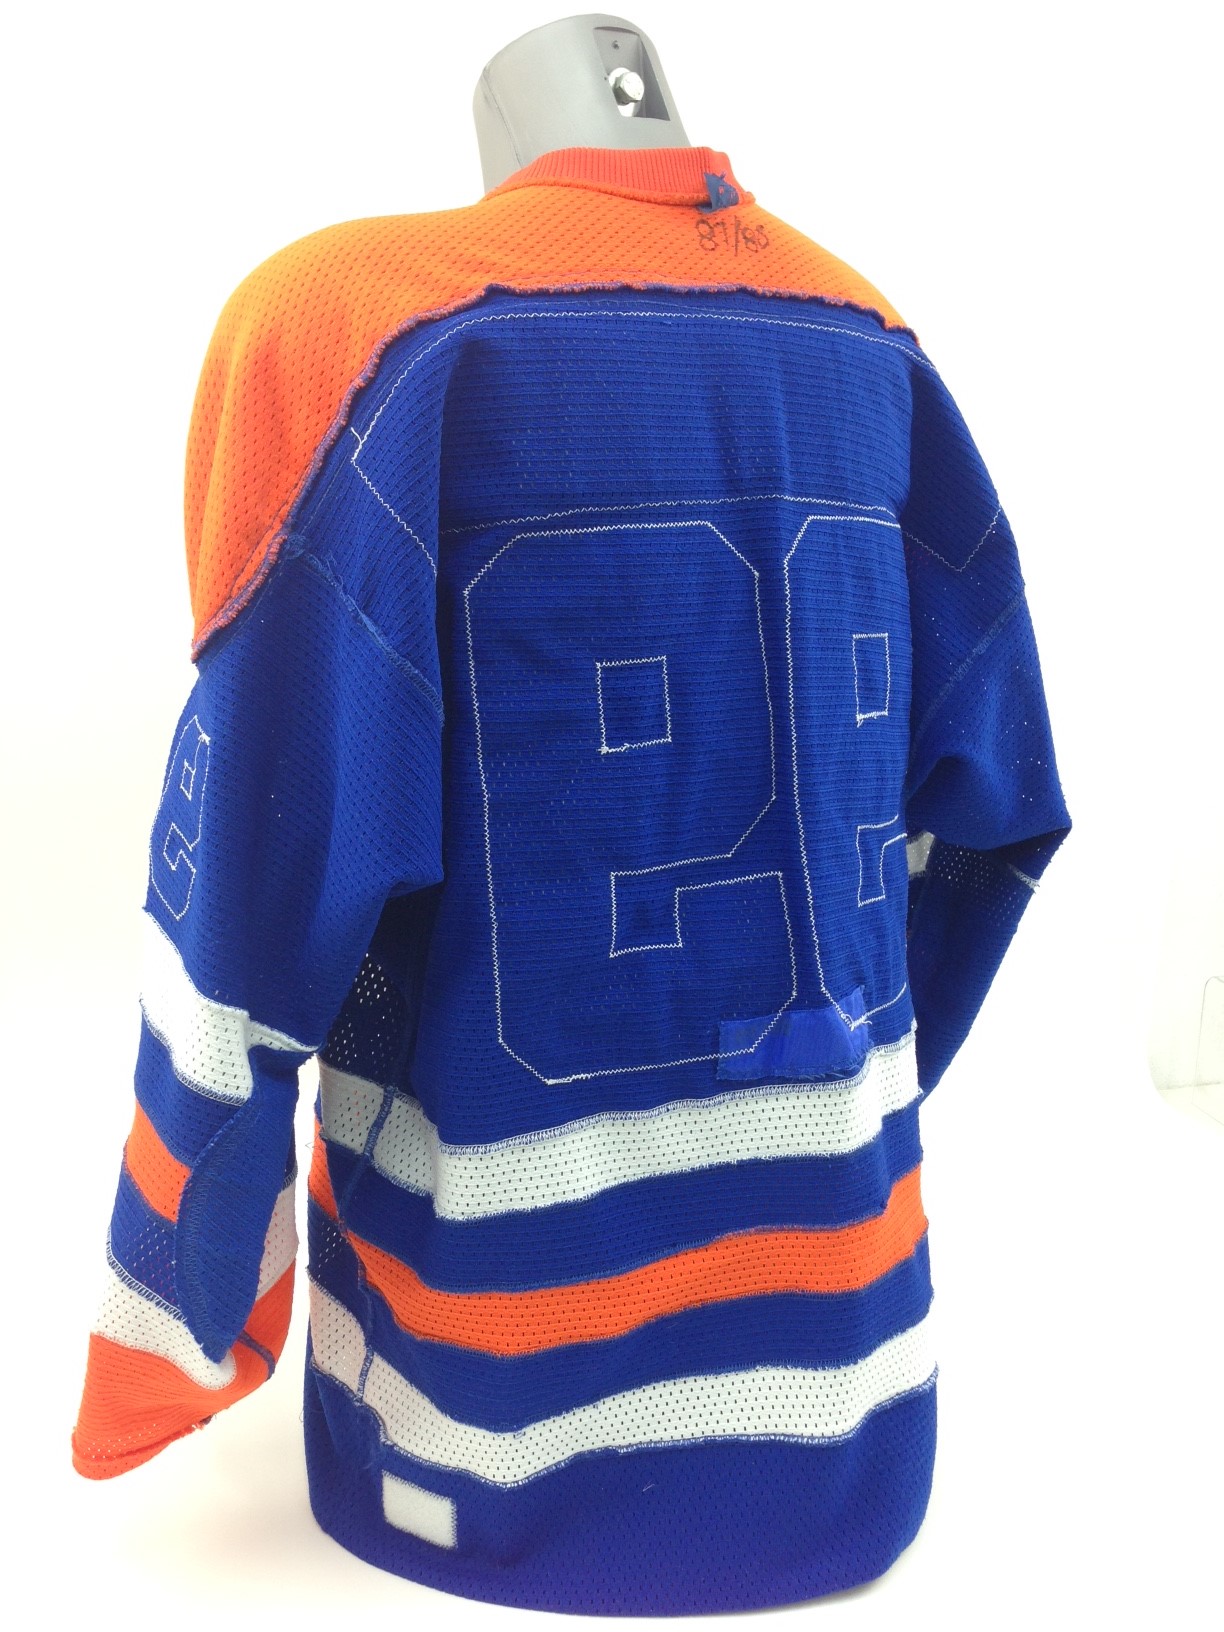 Wayne Gretzky Game-Worn Oilers Jersey From Stanley Cup Clincher